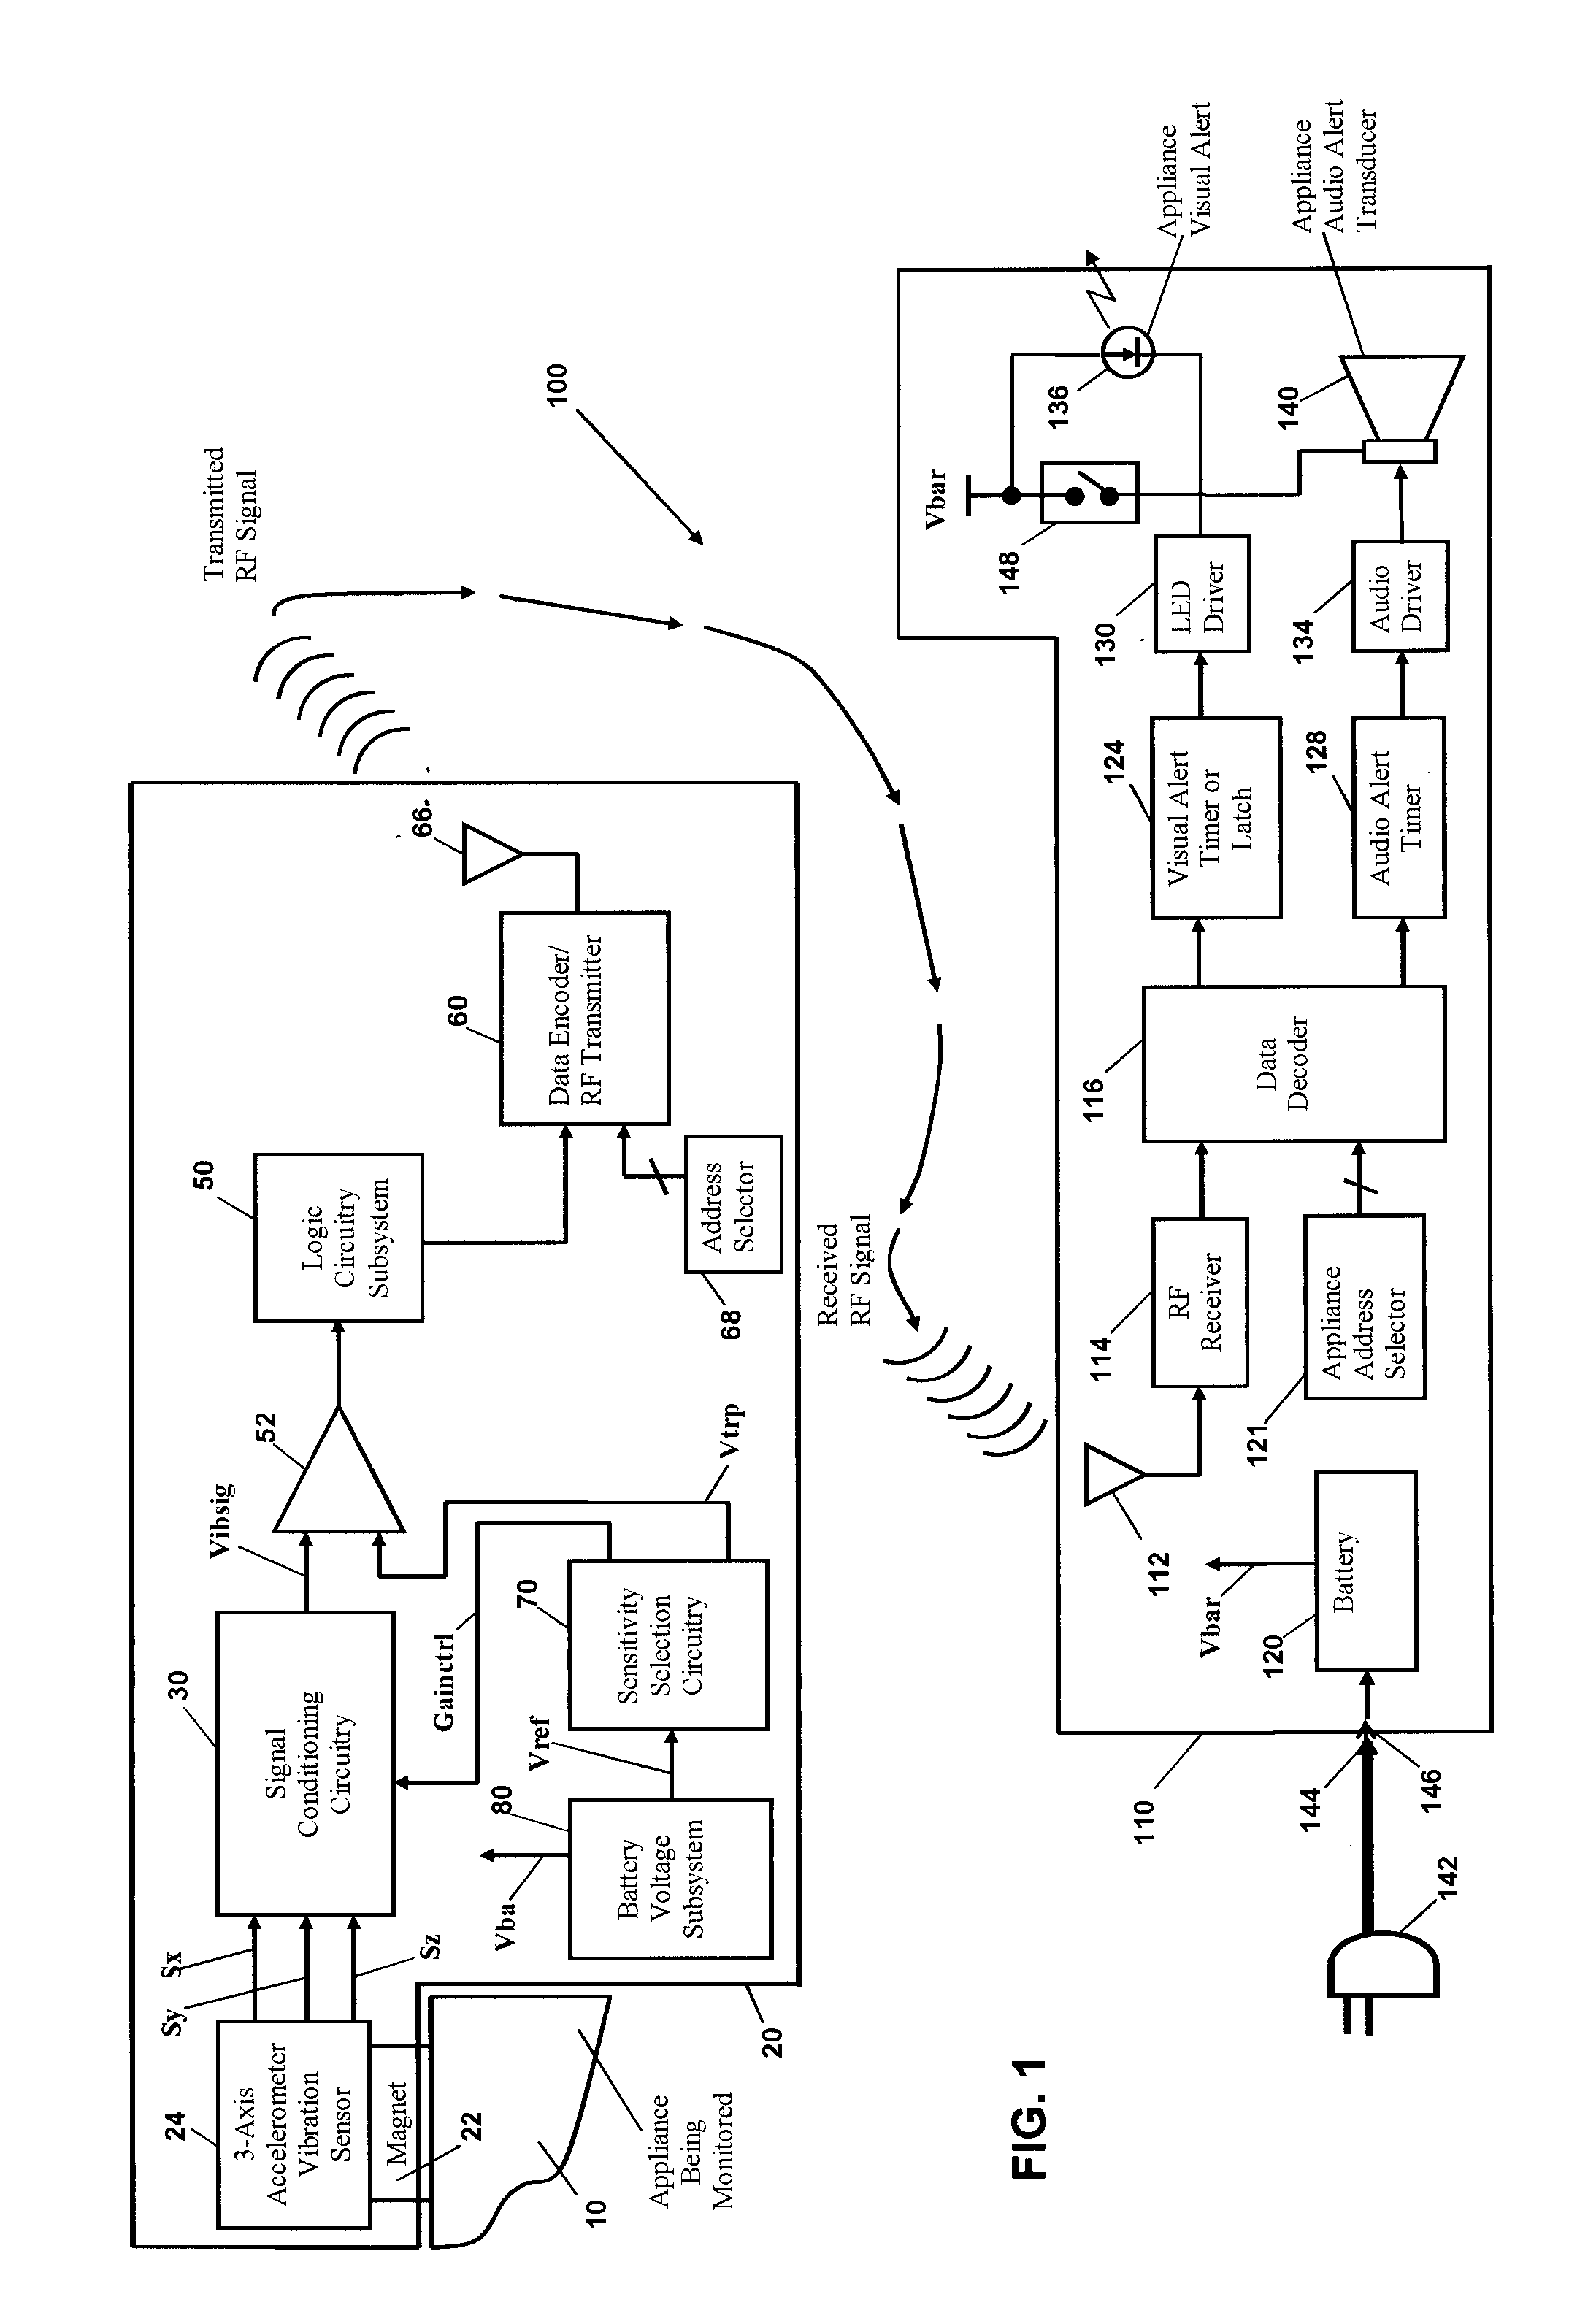 Machine or device monitoring and alert method and system